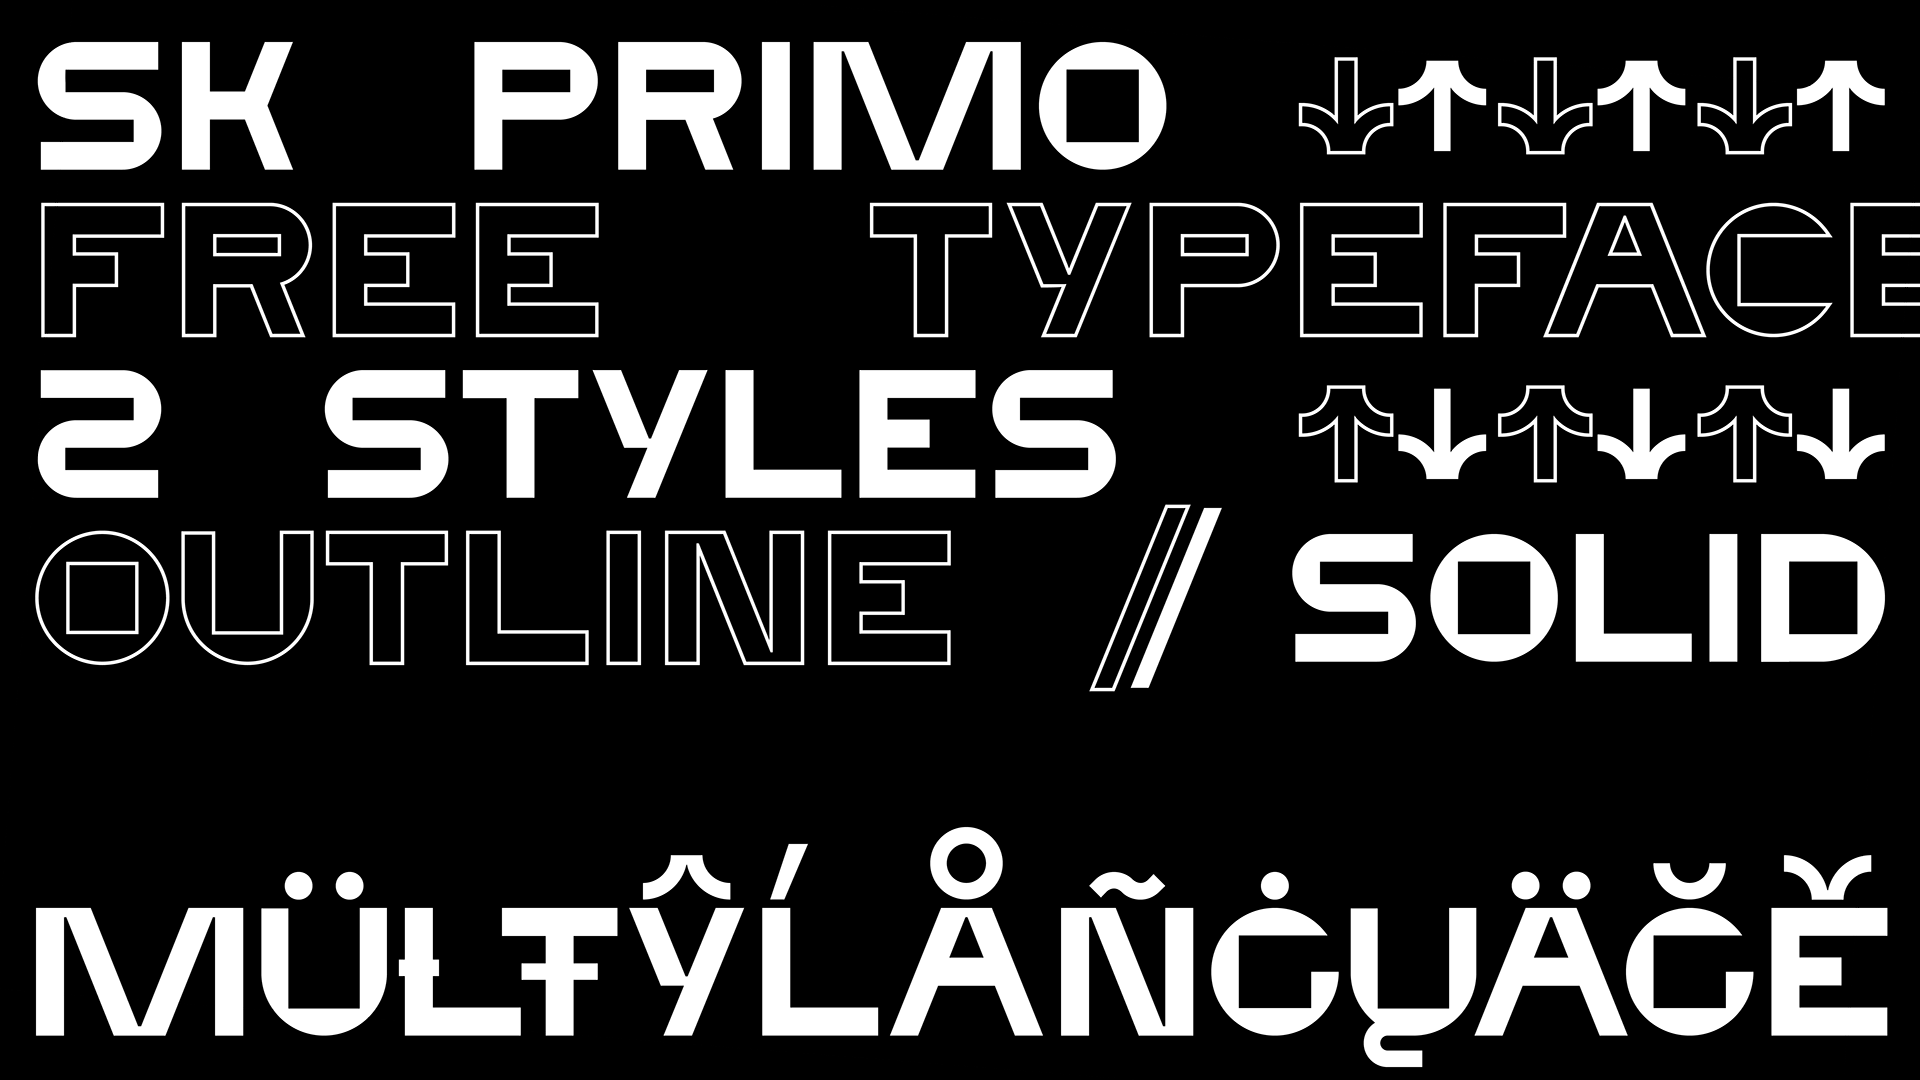 Example font SK Primo #1